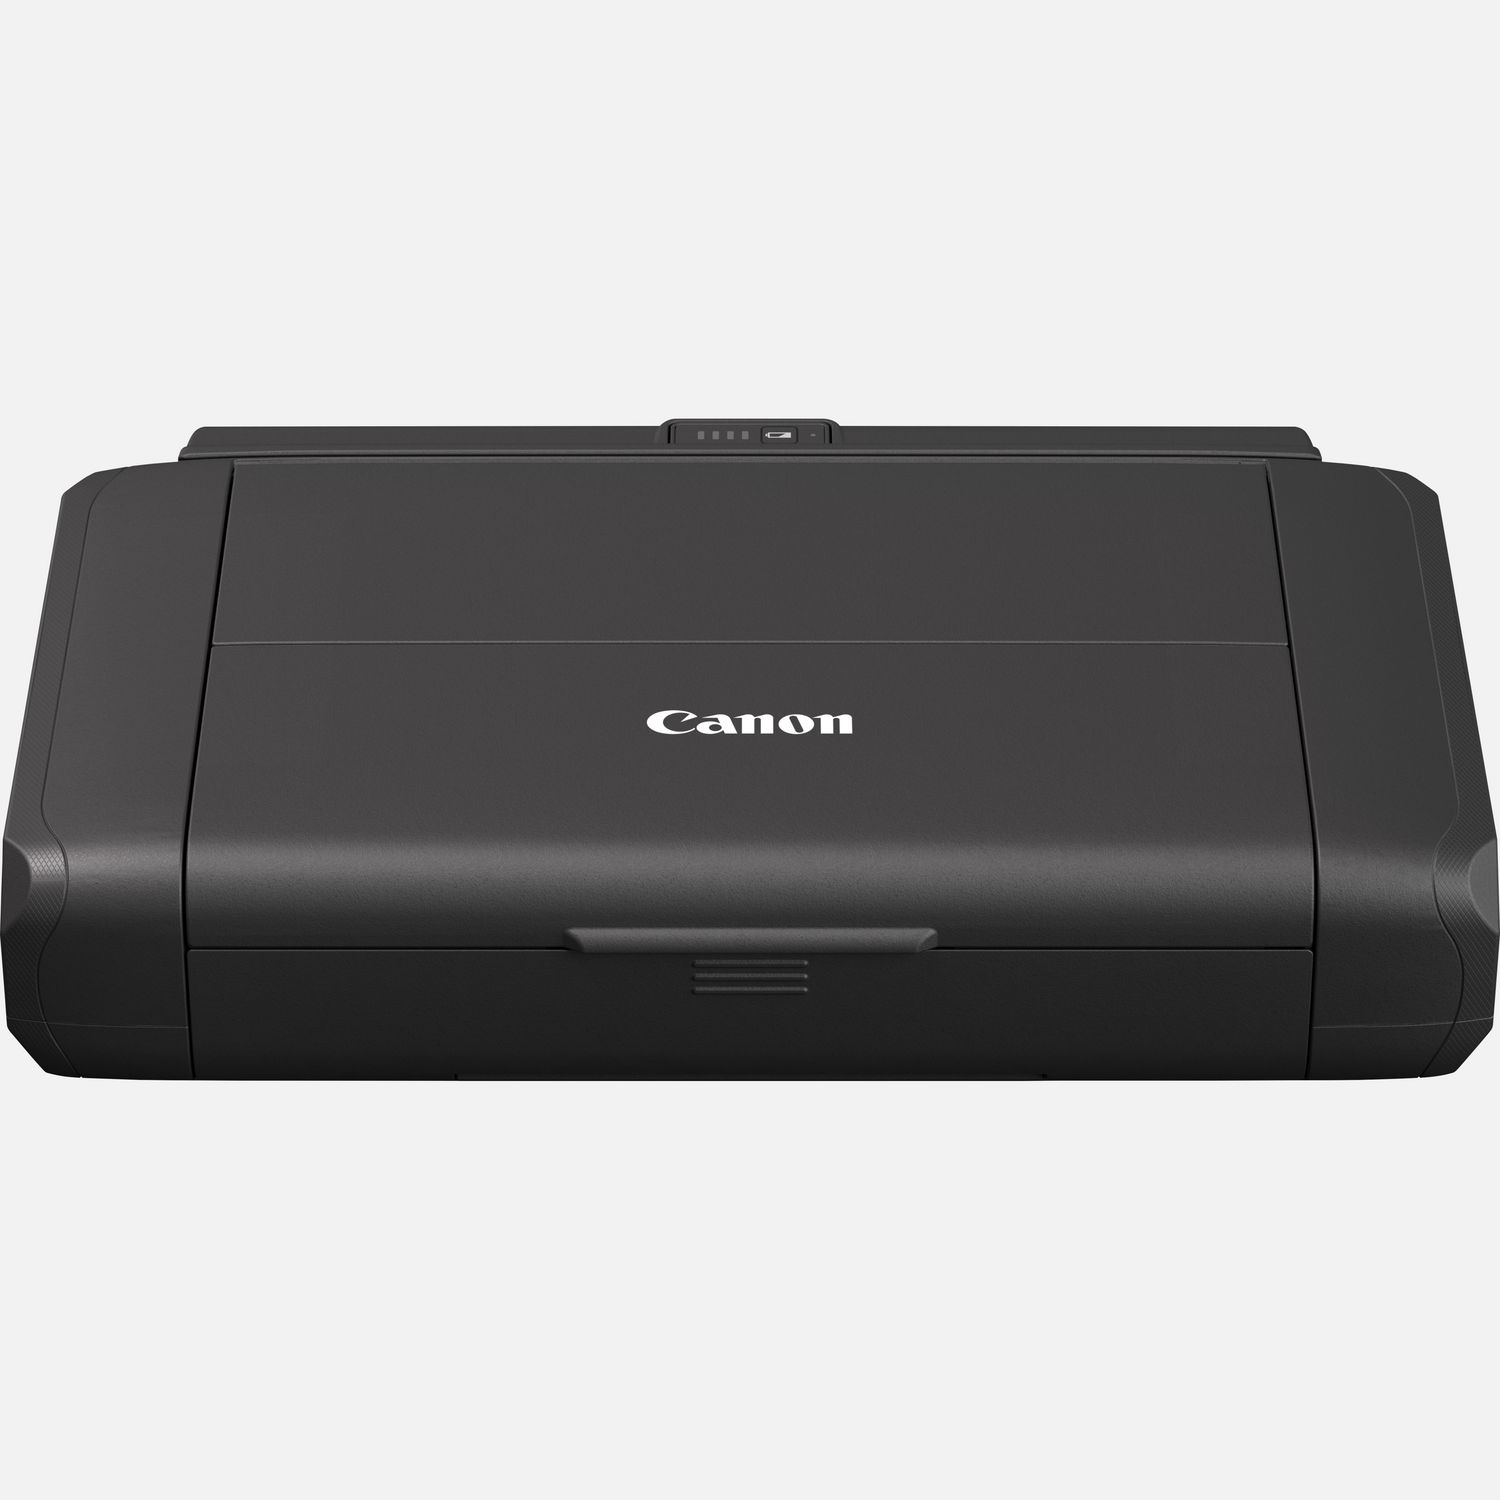 How to Install Canon PIXMA TR150 Printer Driver on Manjaro - Featured